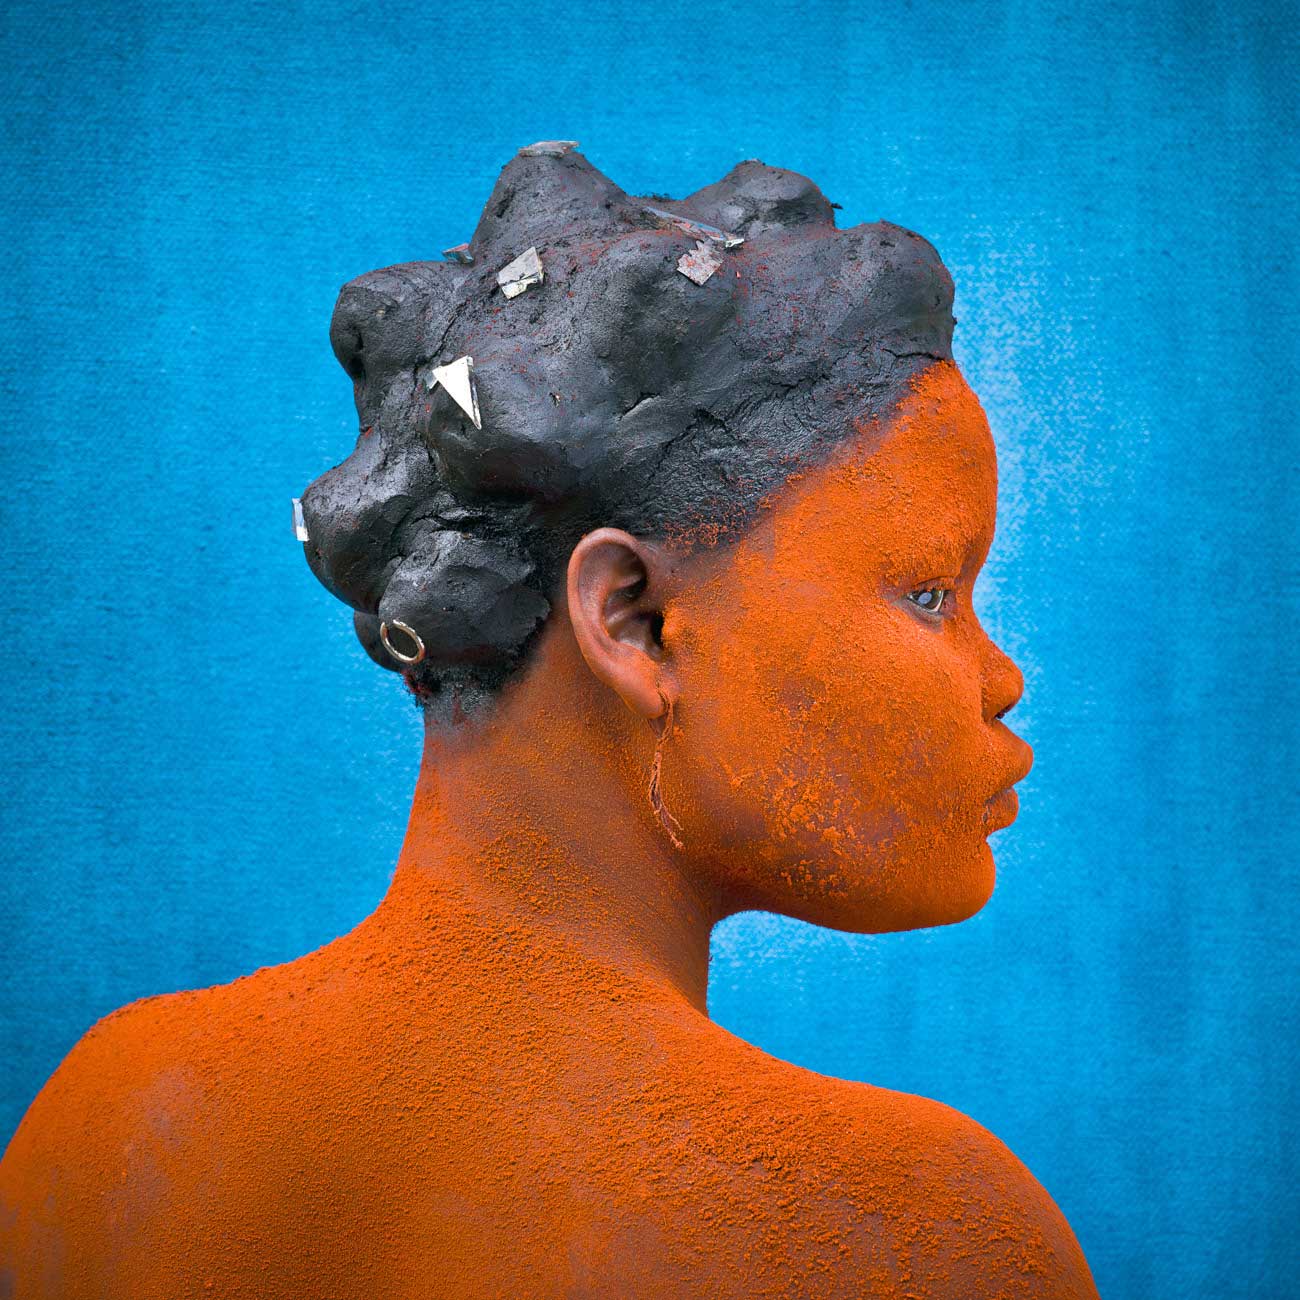 For the Ekondas pygmies in the Democratic Republic of Congo, the most important moment in the life of a woman is the birth of her first child. Every day the young woman engages in an elaborate beautification ritual to draw attention to herself.